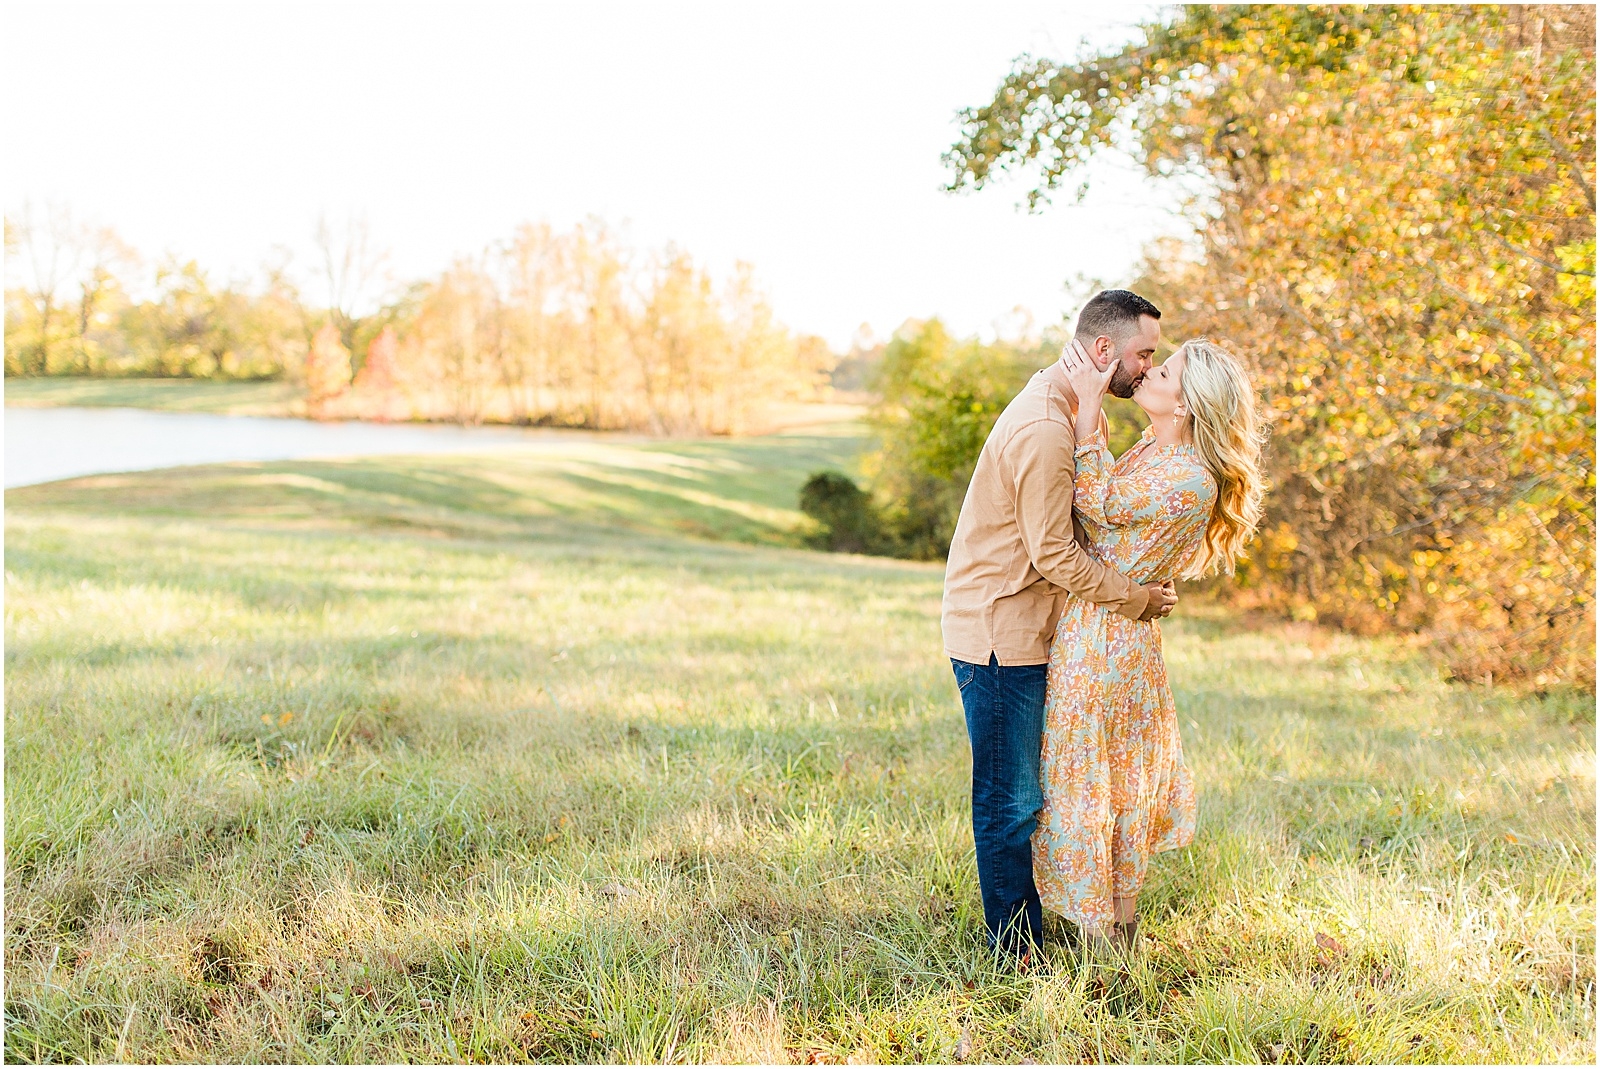 A Southern Indiana Engagement Session | Charleston and Erin | Bret and Brandie Photography002.jpg